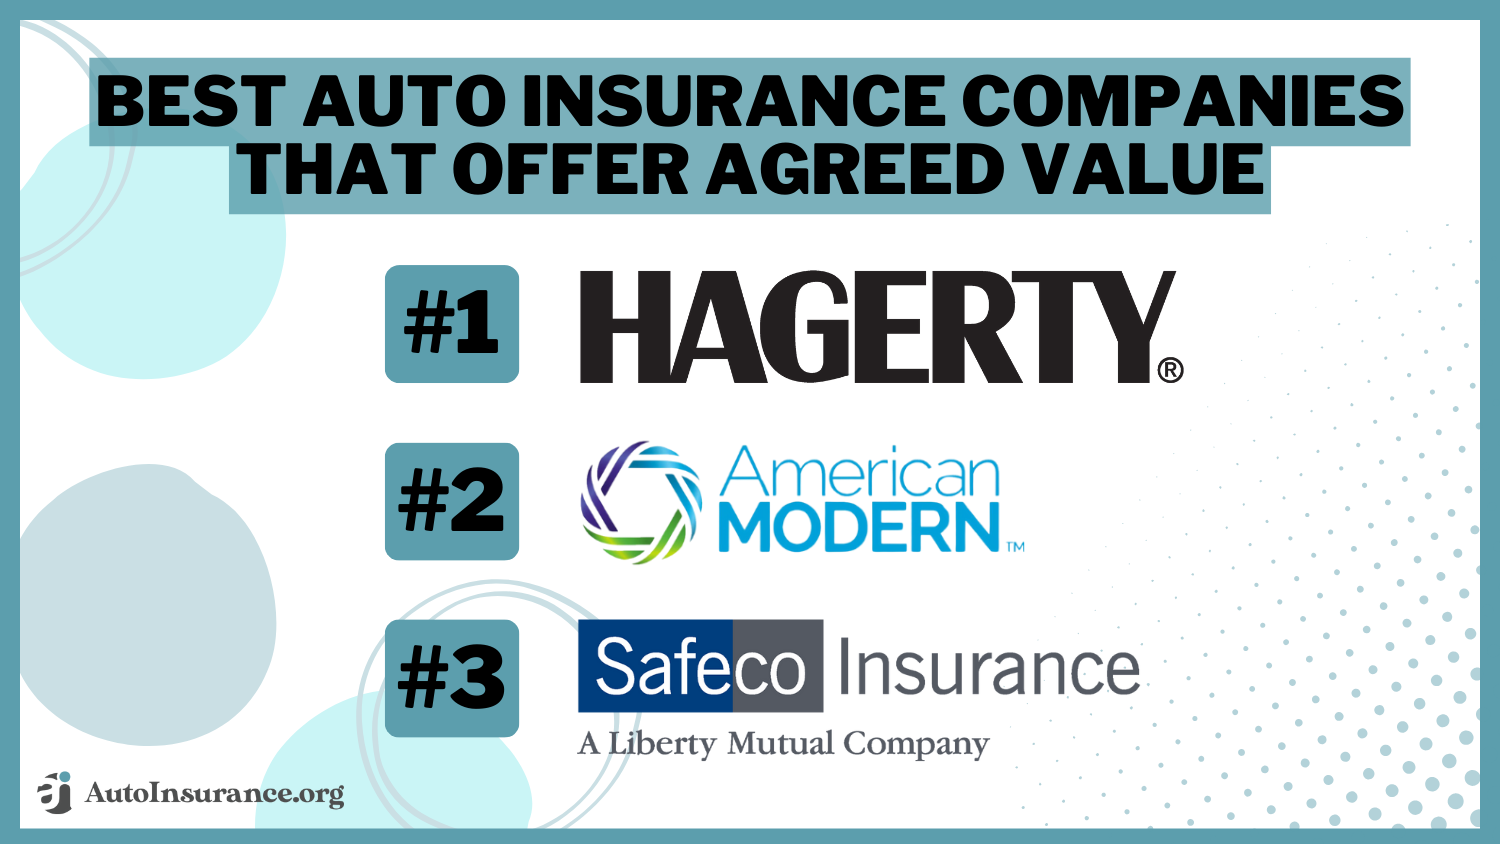 Best Auto Insurance Companies That Offer Agreed Value